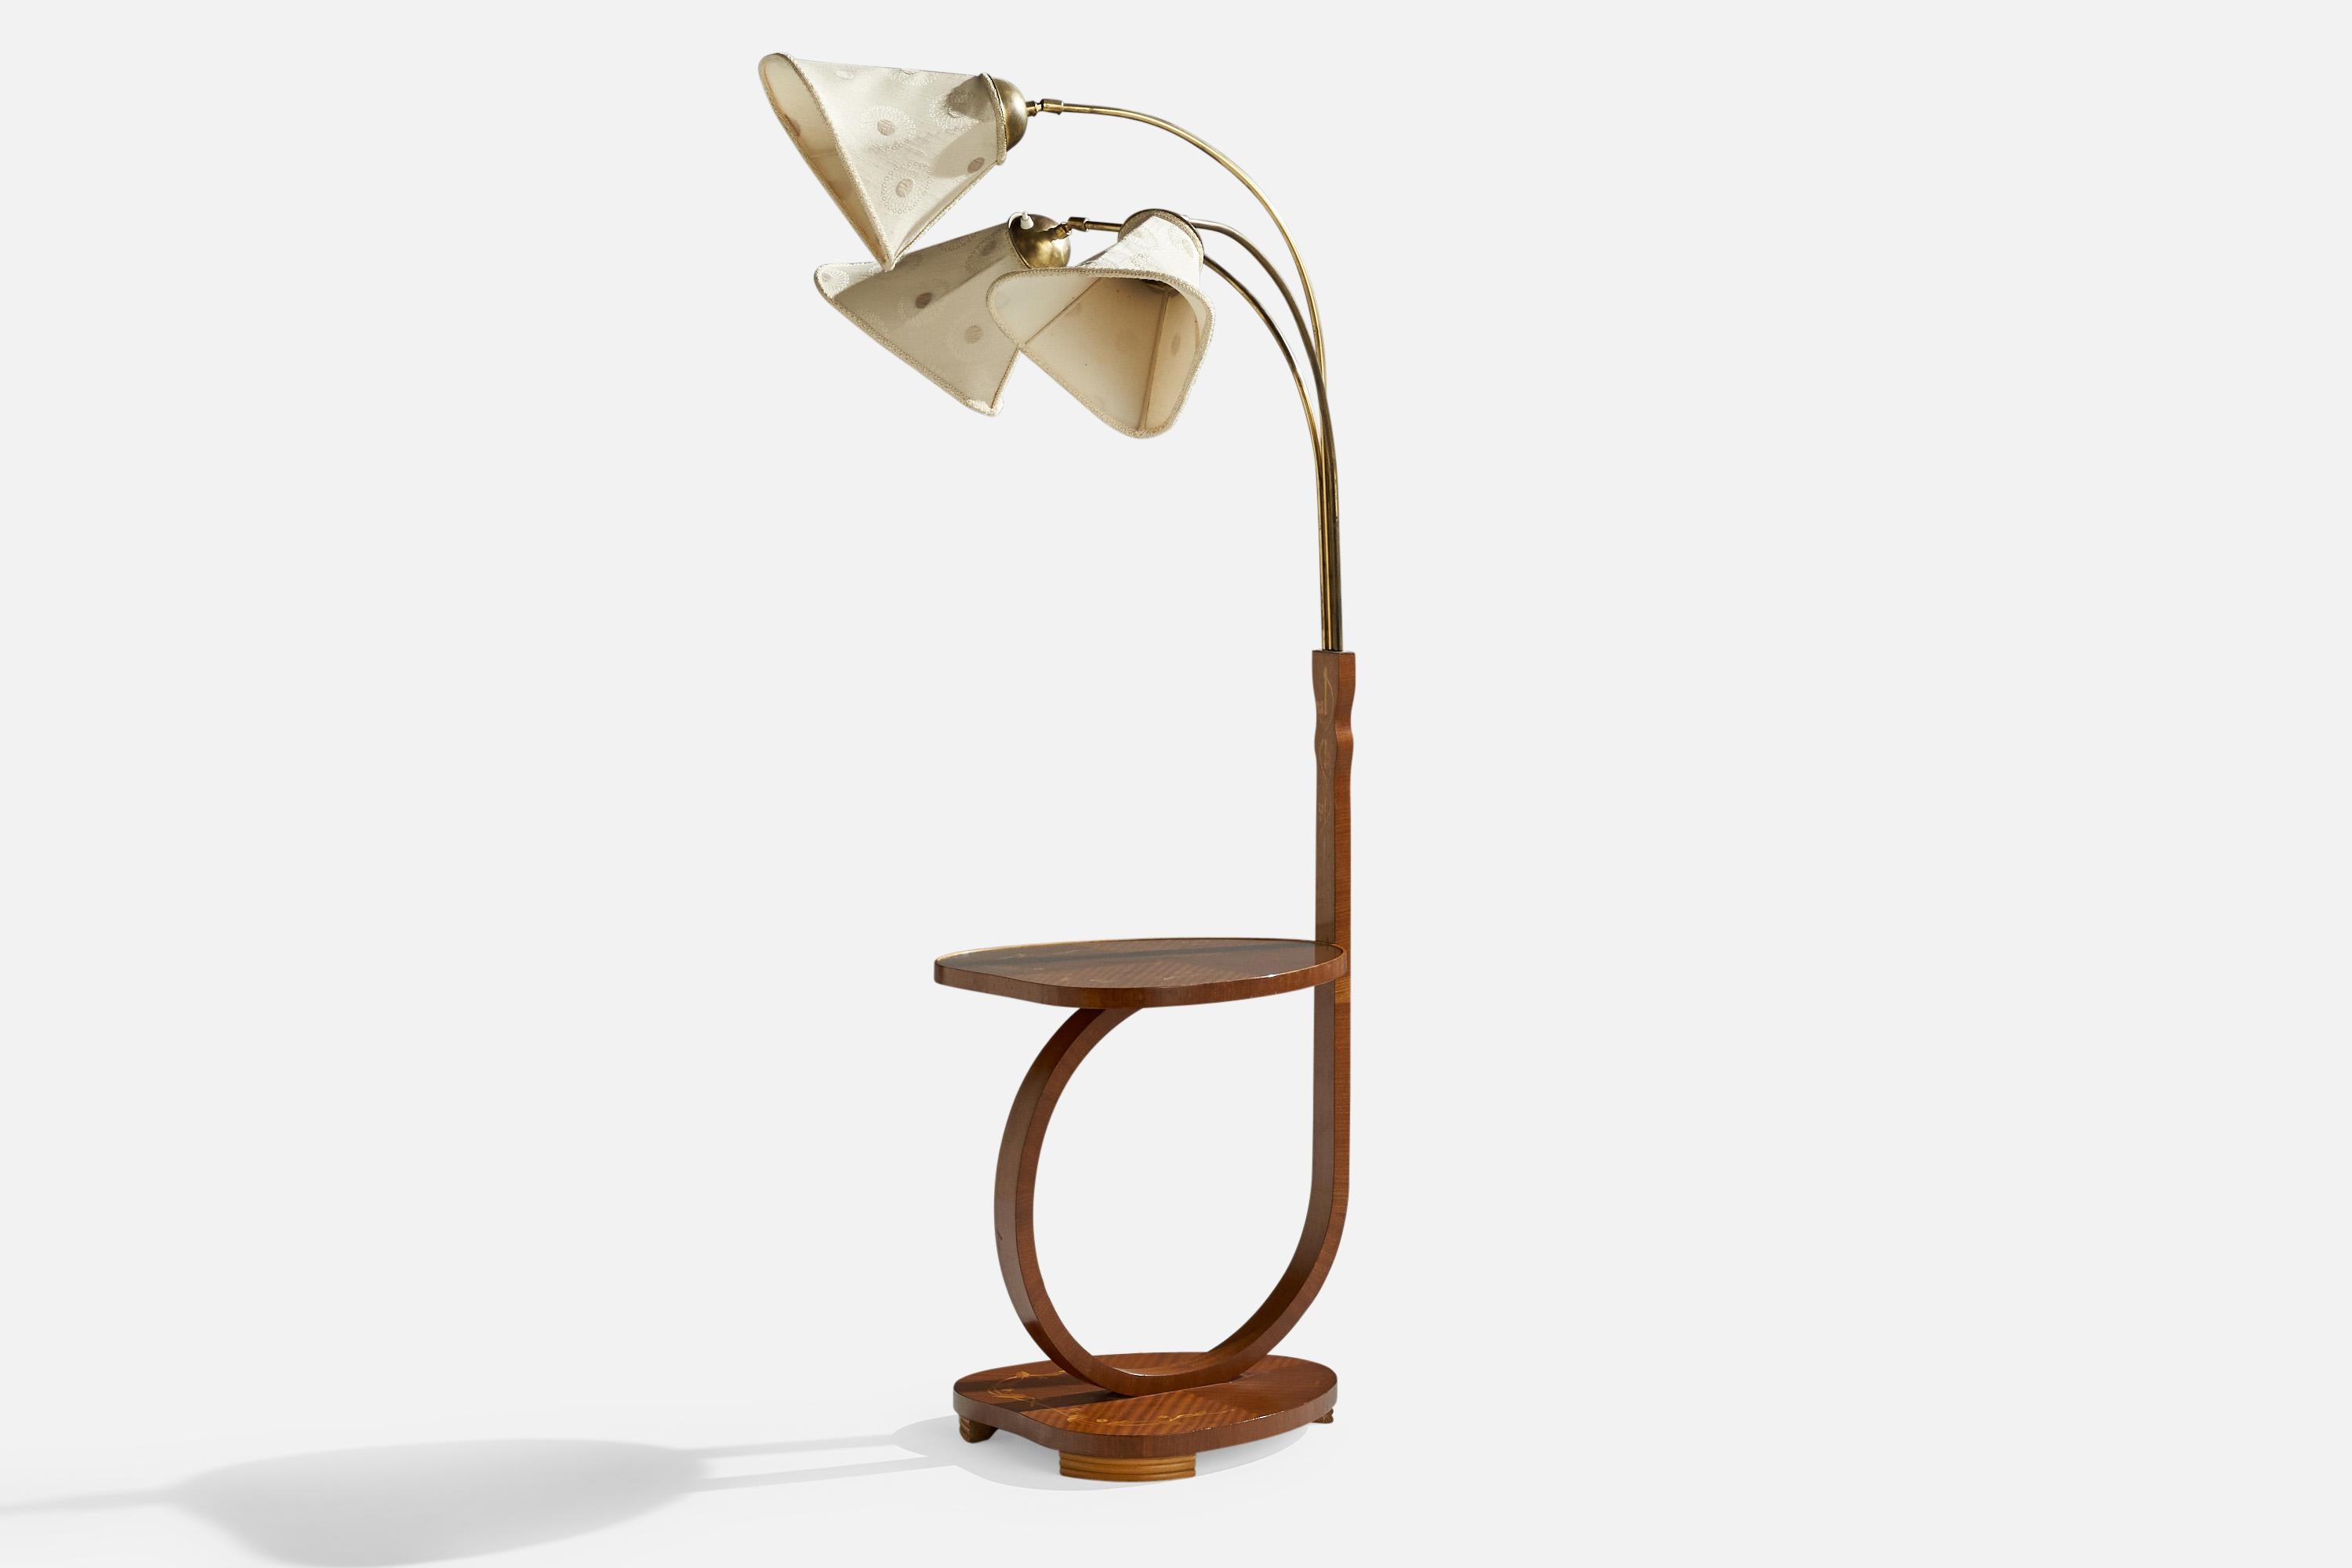 A brass, wood and fabric adjustable three-armed floor lamp with side table, designed and produced in Sweden, 1930s.

Overall Dimensions (inches): 59.25” H x 50.35” W x 28” D
Dimensions vary based on position of lights.
Bulb Specifications: E-26